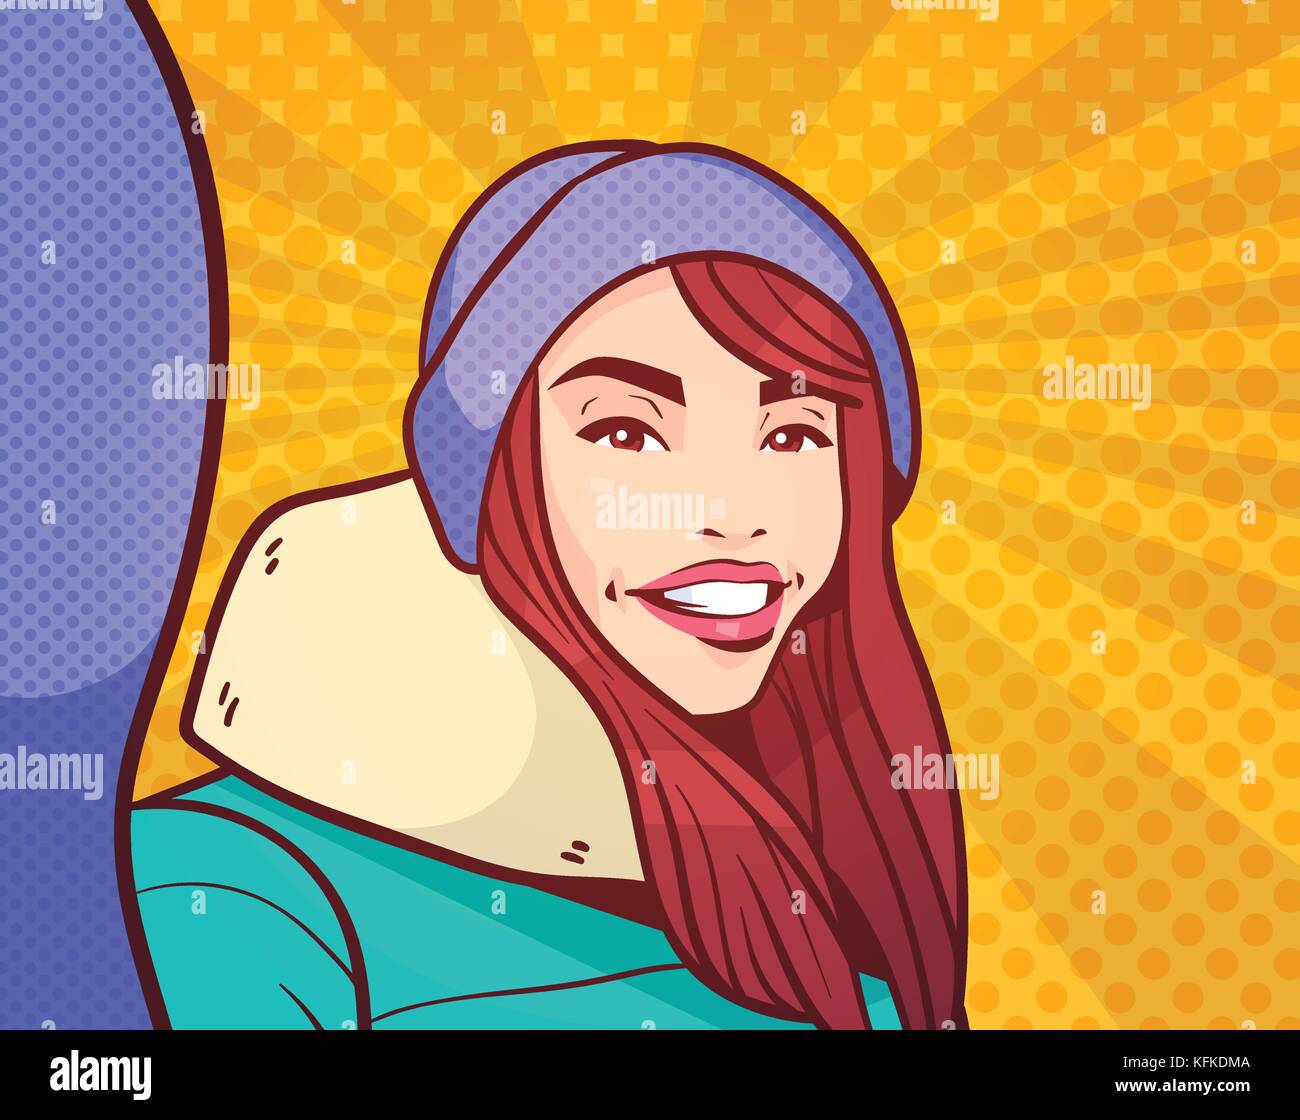 Young Woman Making Selfie Photo Portrait Wearing Winter Clothes Over Colorful Retro Style Background Stock Vector